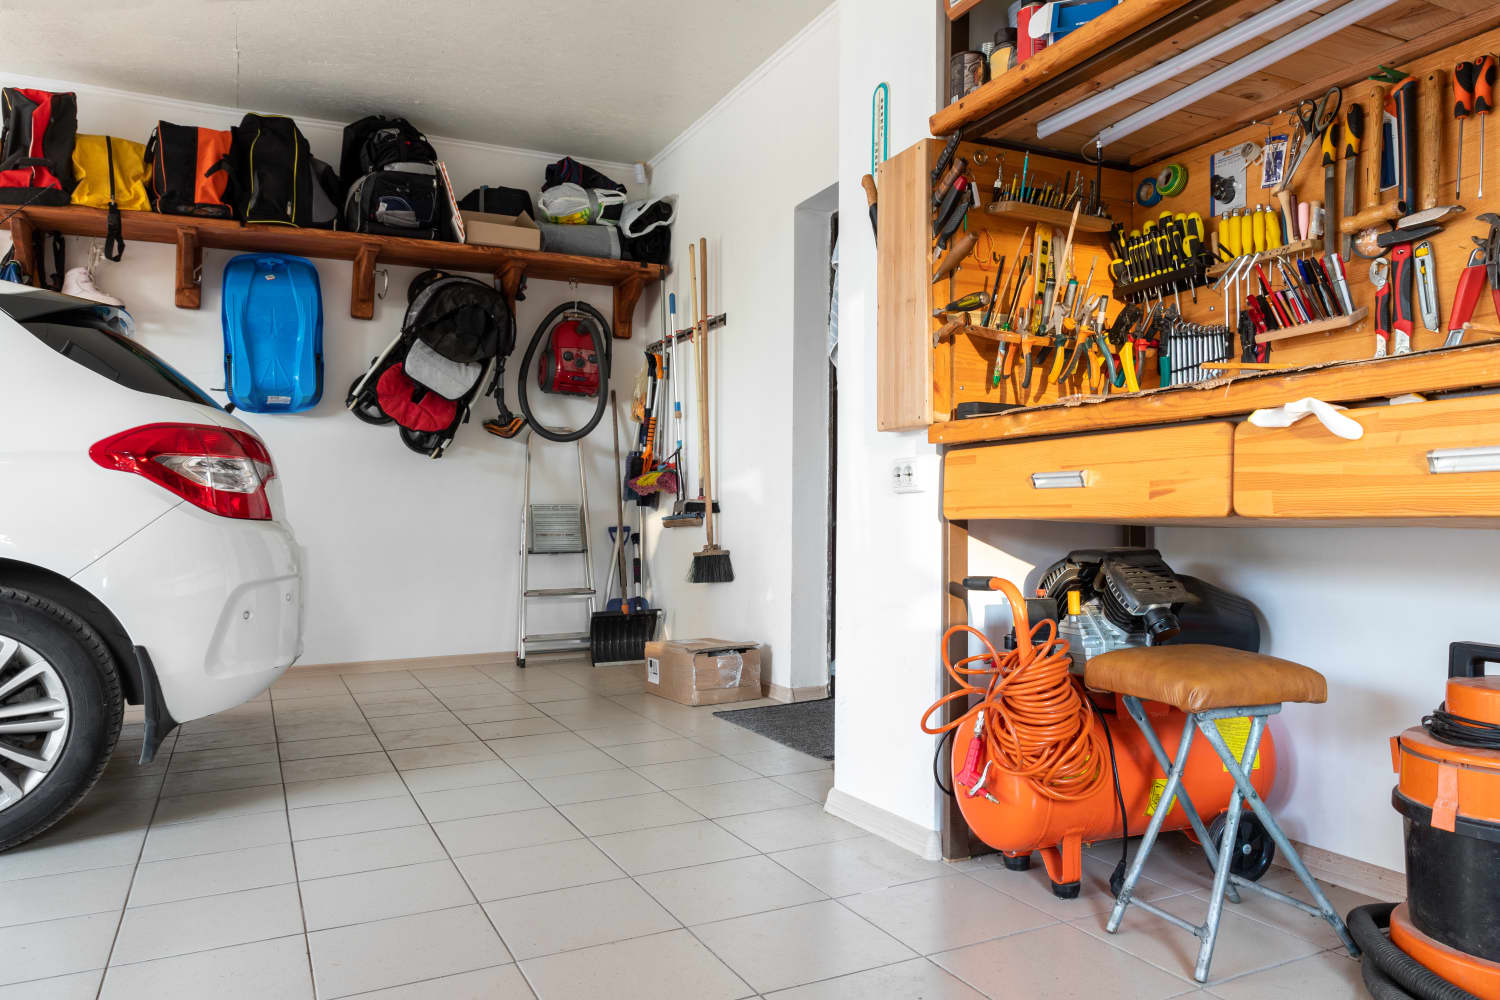 This Mom’s Garage Hack Has People Telling Her It’s the Coolest Thing They’ve Seen